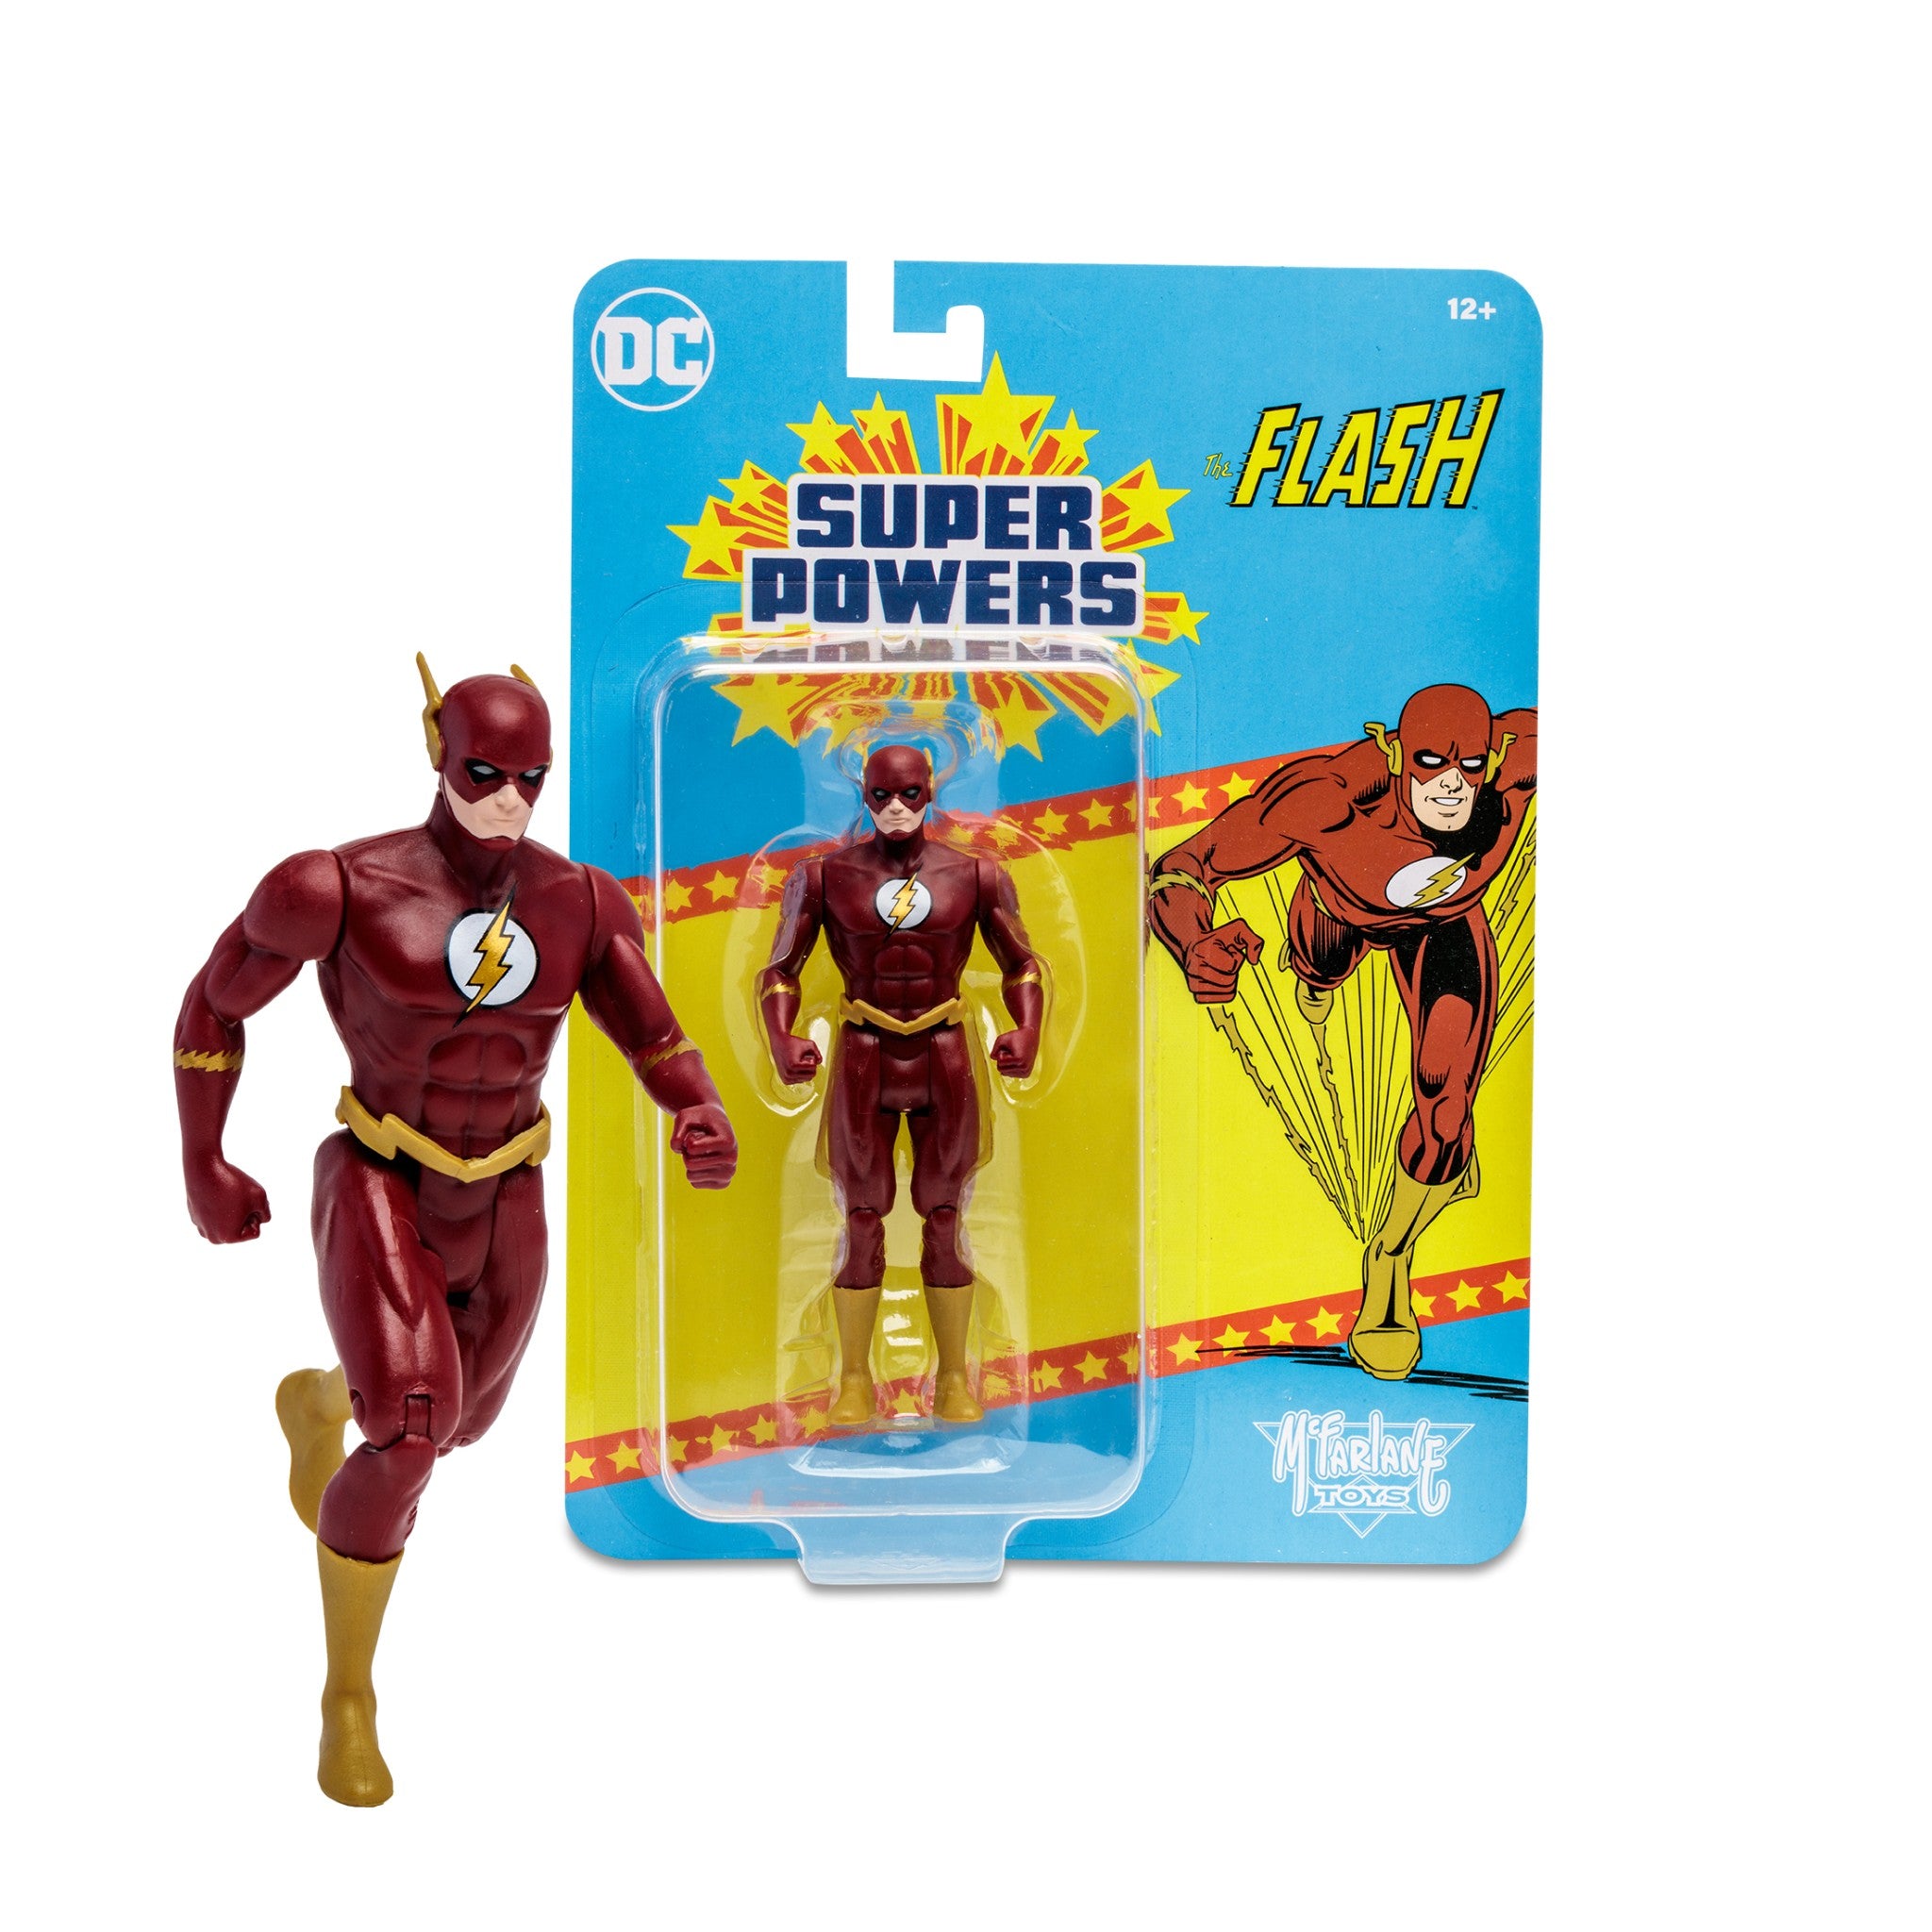 DC Direct Super Powers 2023 Flash Opposites Attract - McFarlane Toys - 0